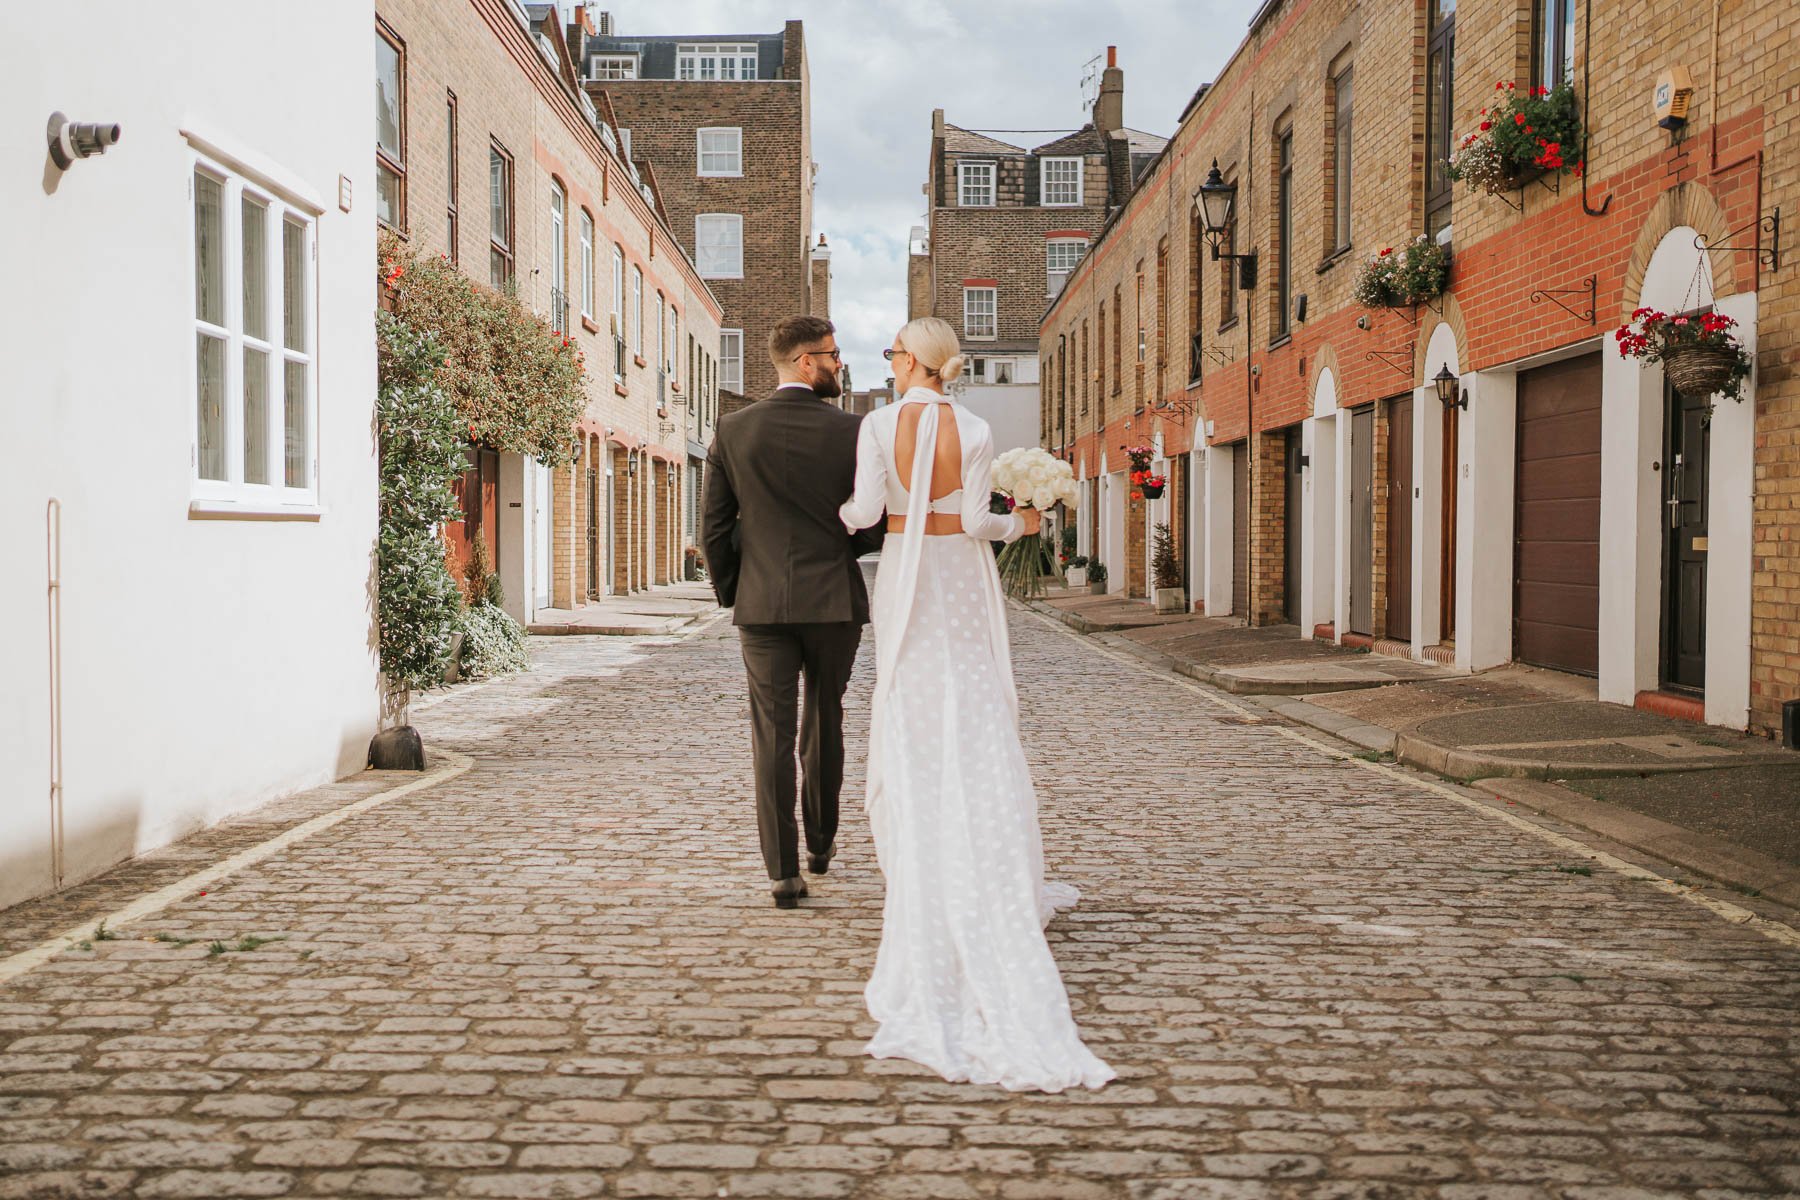  Bride and groom walk away from photographer down cobbled street behind Marylebone Town Hall.  